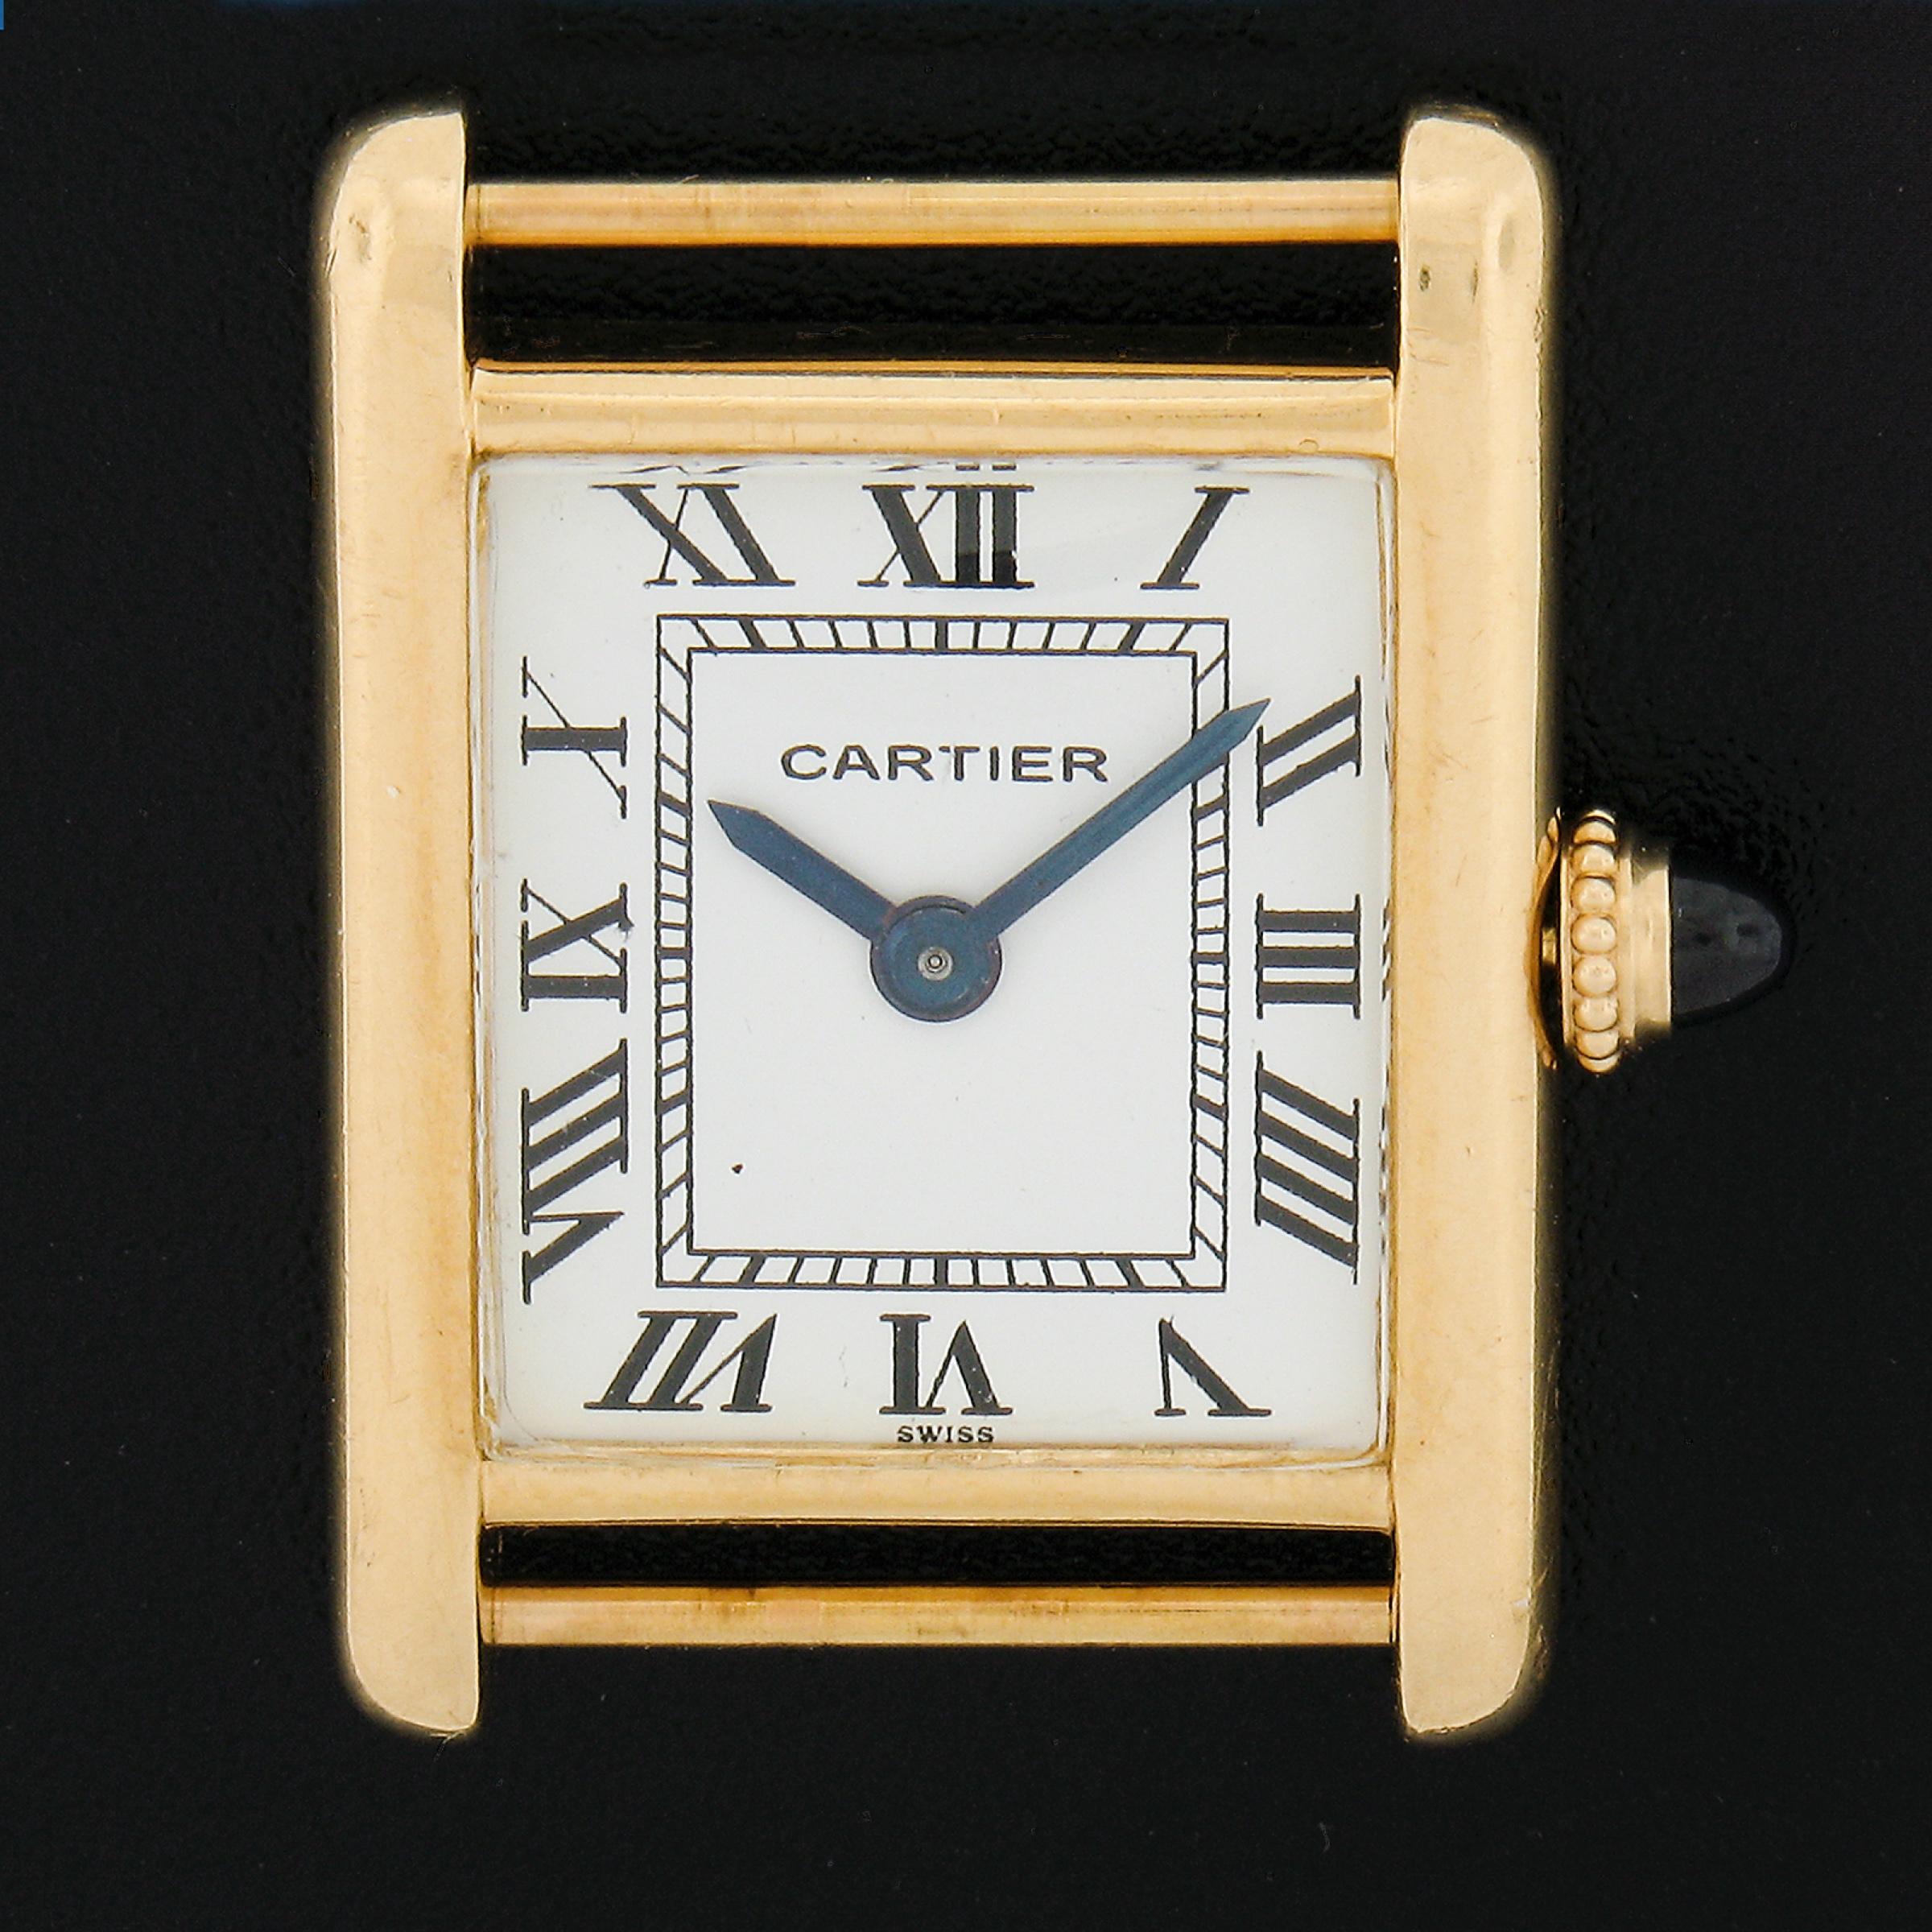 Here we have an authentic vintage Cartier Tank watch with a case crafted in solid 18k yellow gold as well as the deployant buckle. This watch features a Swiss-made, 20 jewels mechanical manually wound movement by Audemars Piguet that keeps accurate